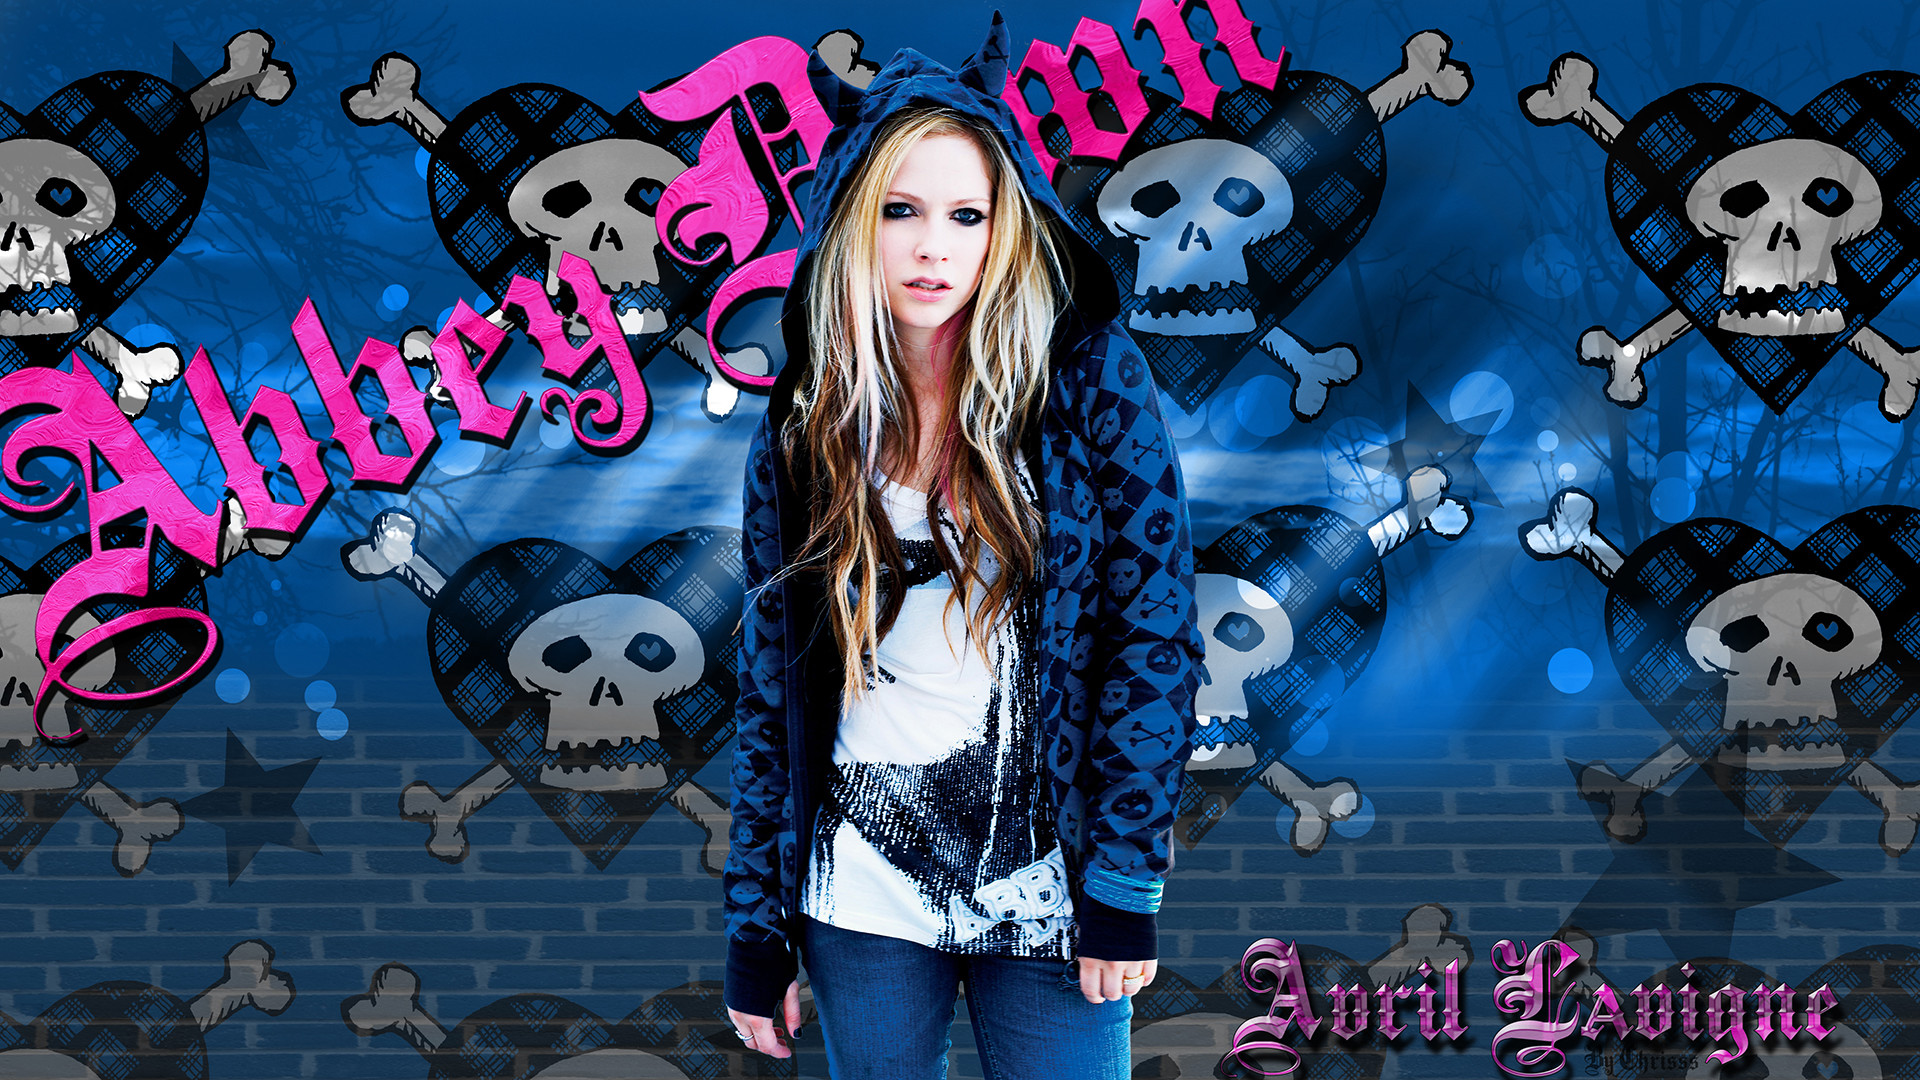 1920x1080 Avril Lavigne wallpapers and stock photos